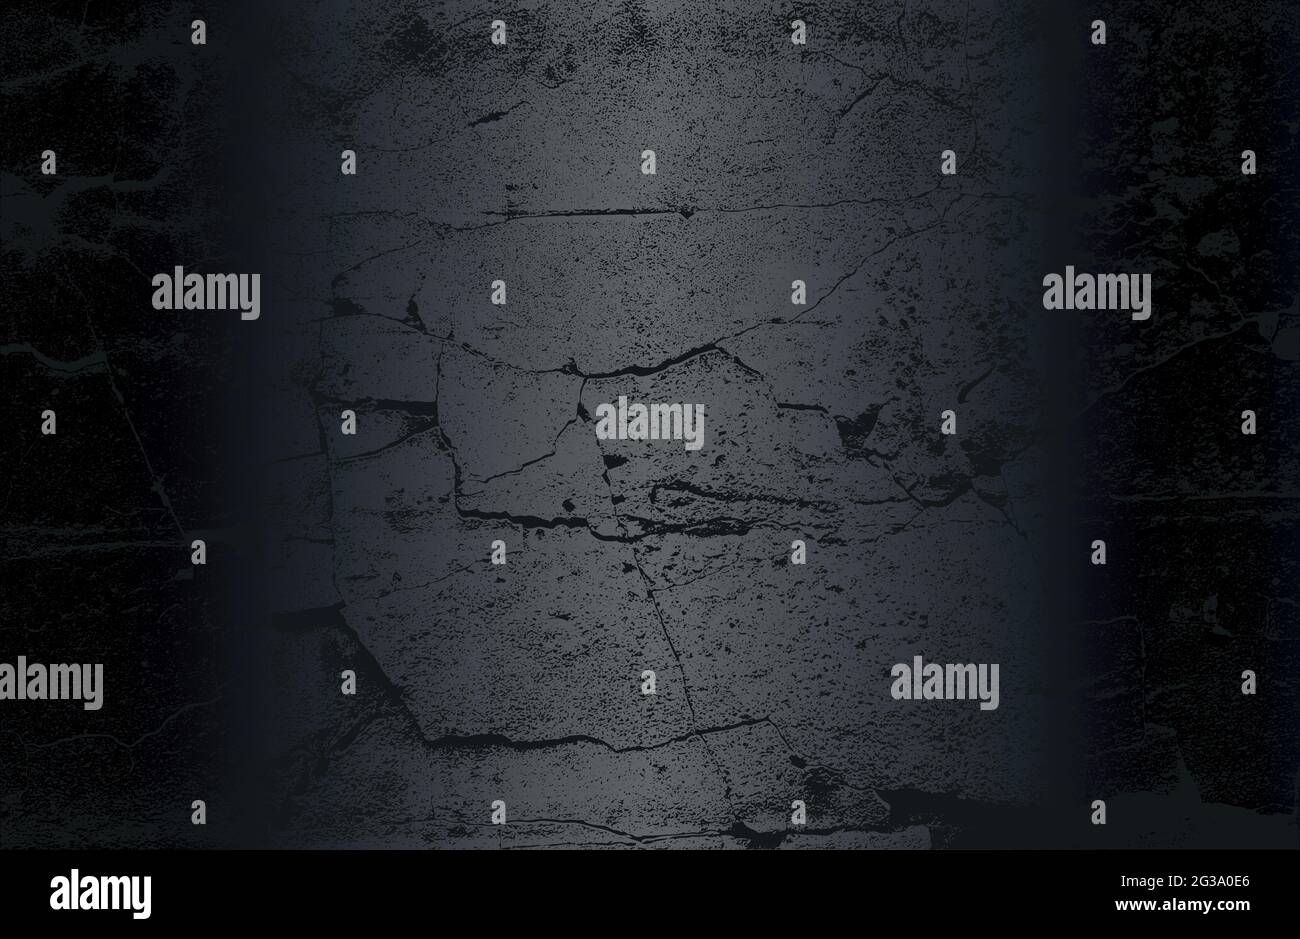 Luxury black metal gradient background with distressed cracked concrete texture. Vector illustration Stock Vector